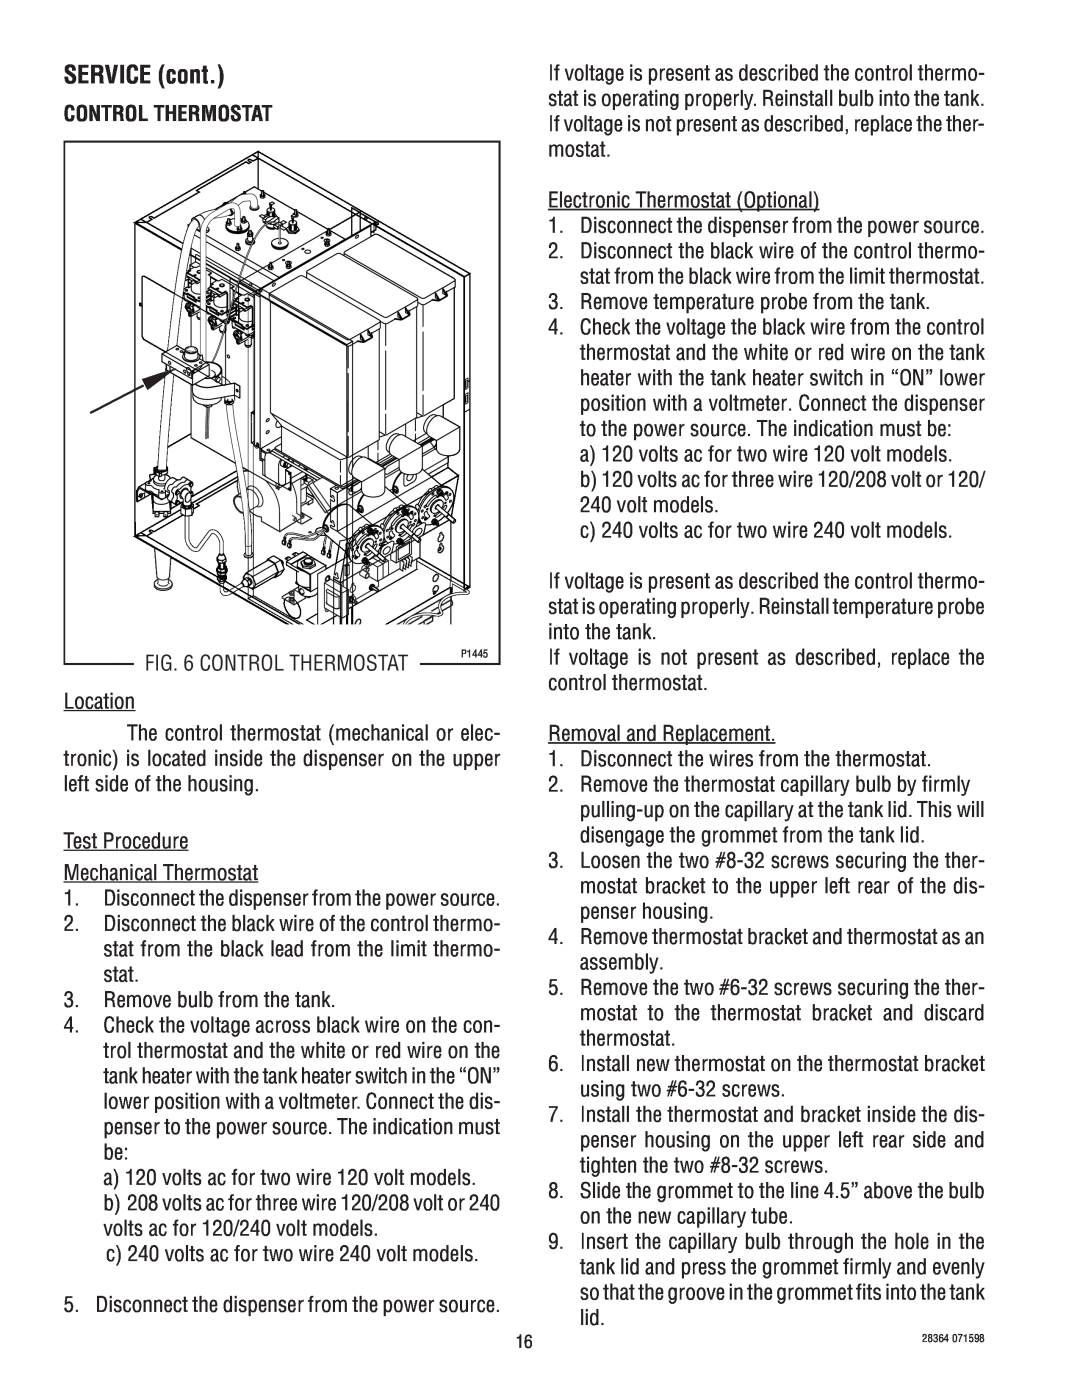 Bunn FMD-3 service manual Control Thermostat, SERVICE cont 